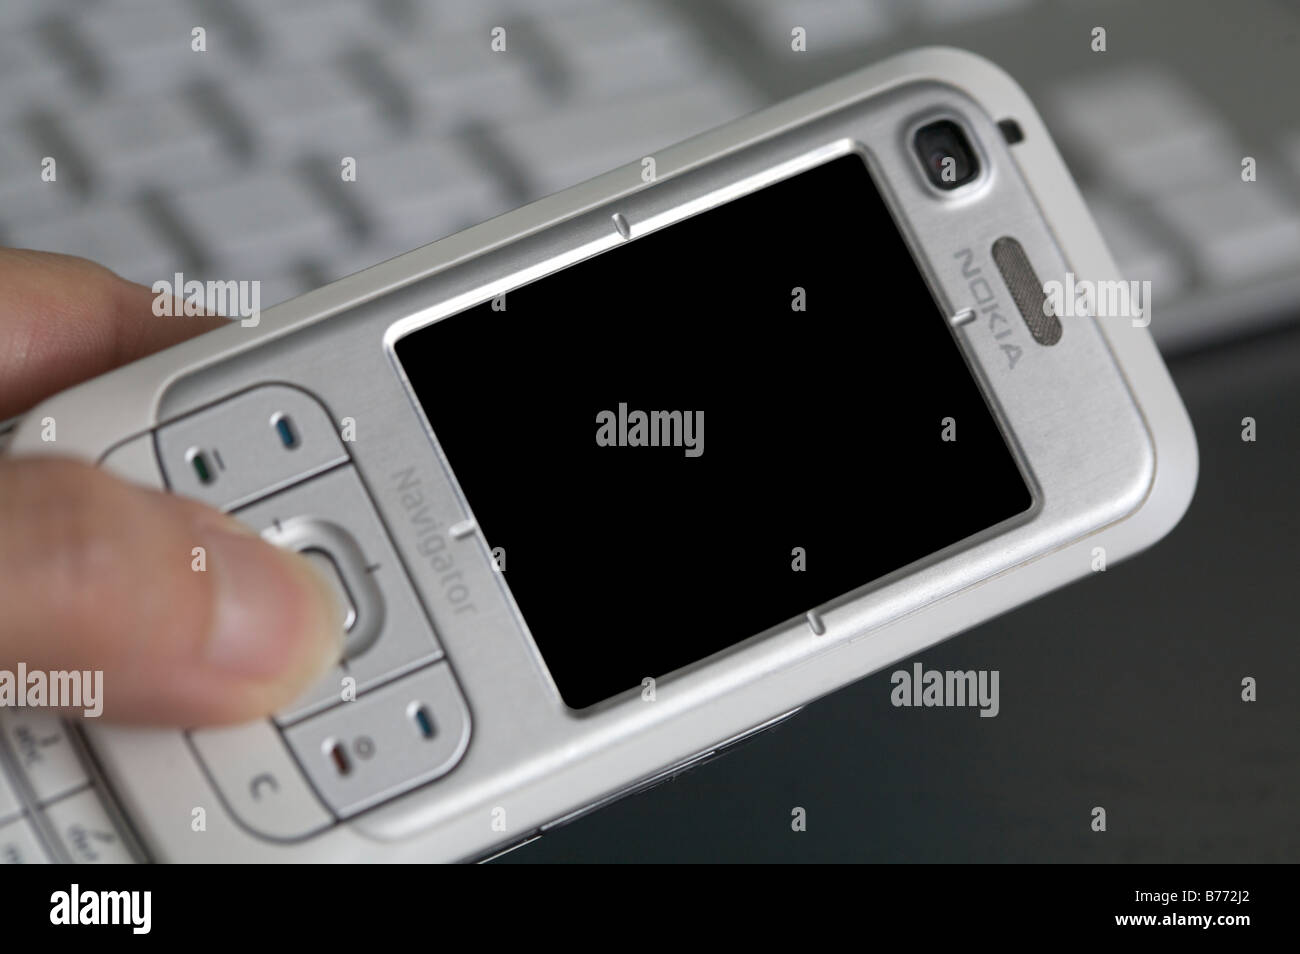 Nokia 6110 Navigator with keyboard in the background Stock Photo - Alamy